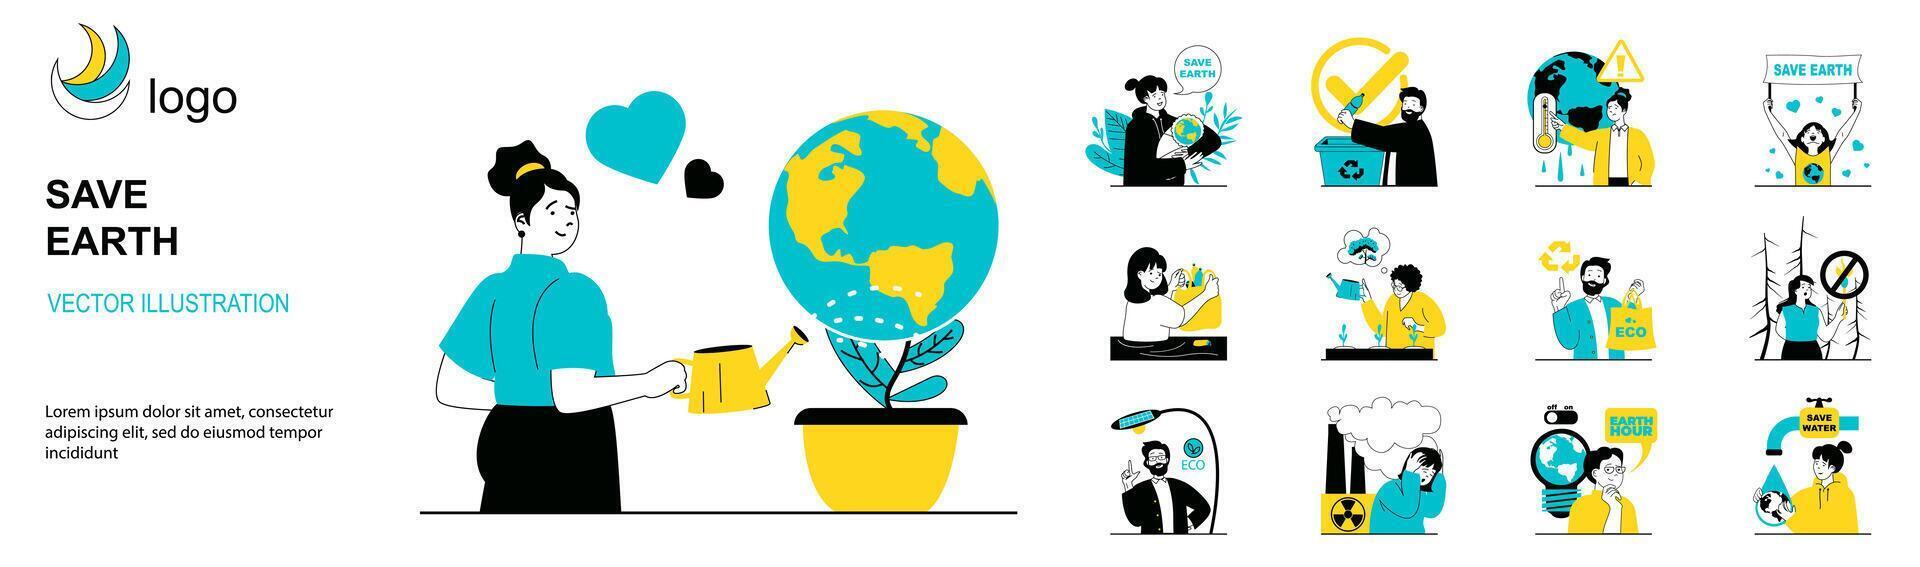 Save Earth concept with character situations collection. Bundle of scenes people activists and eco volunteers separate garbage, protect nature, care for planet. Vector illustrations in flat web design